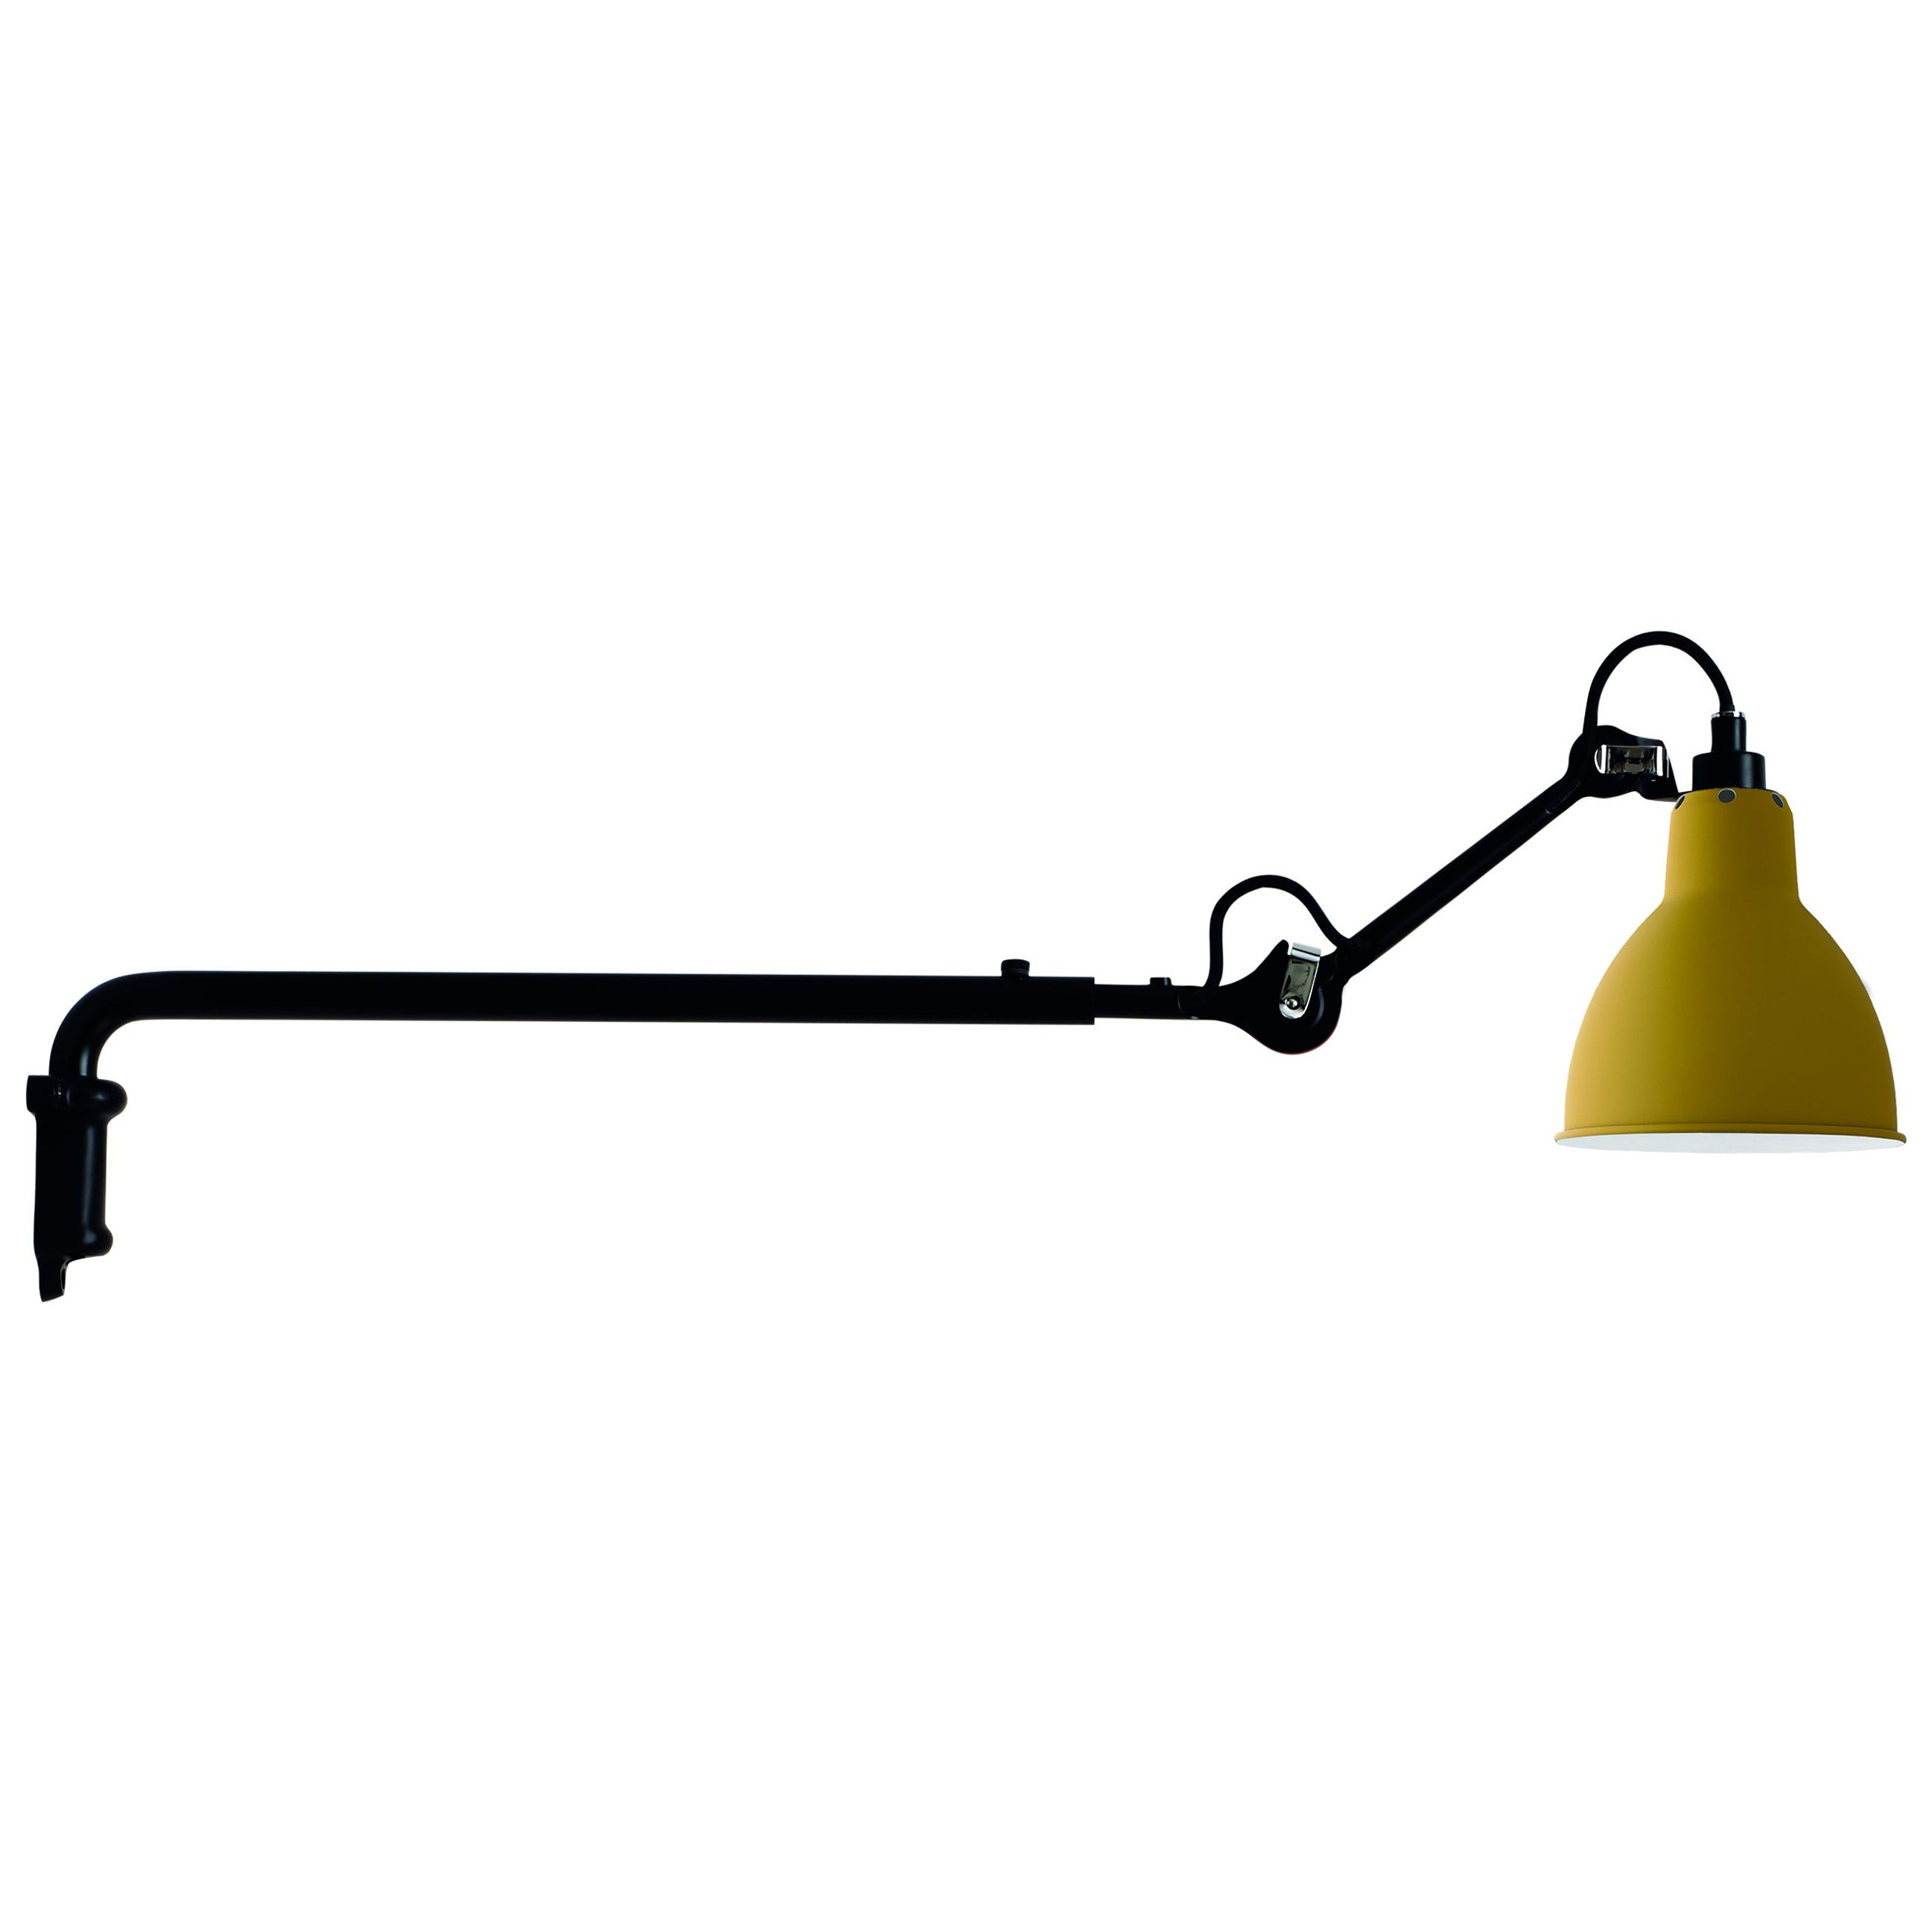 DCW Editions La Lampe Gras N°203 Wall Lamp in Black Steel Arm and Yellow Shade For Sale